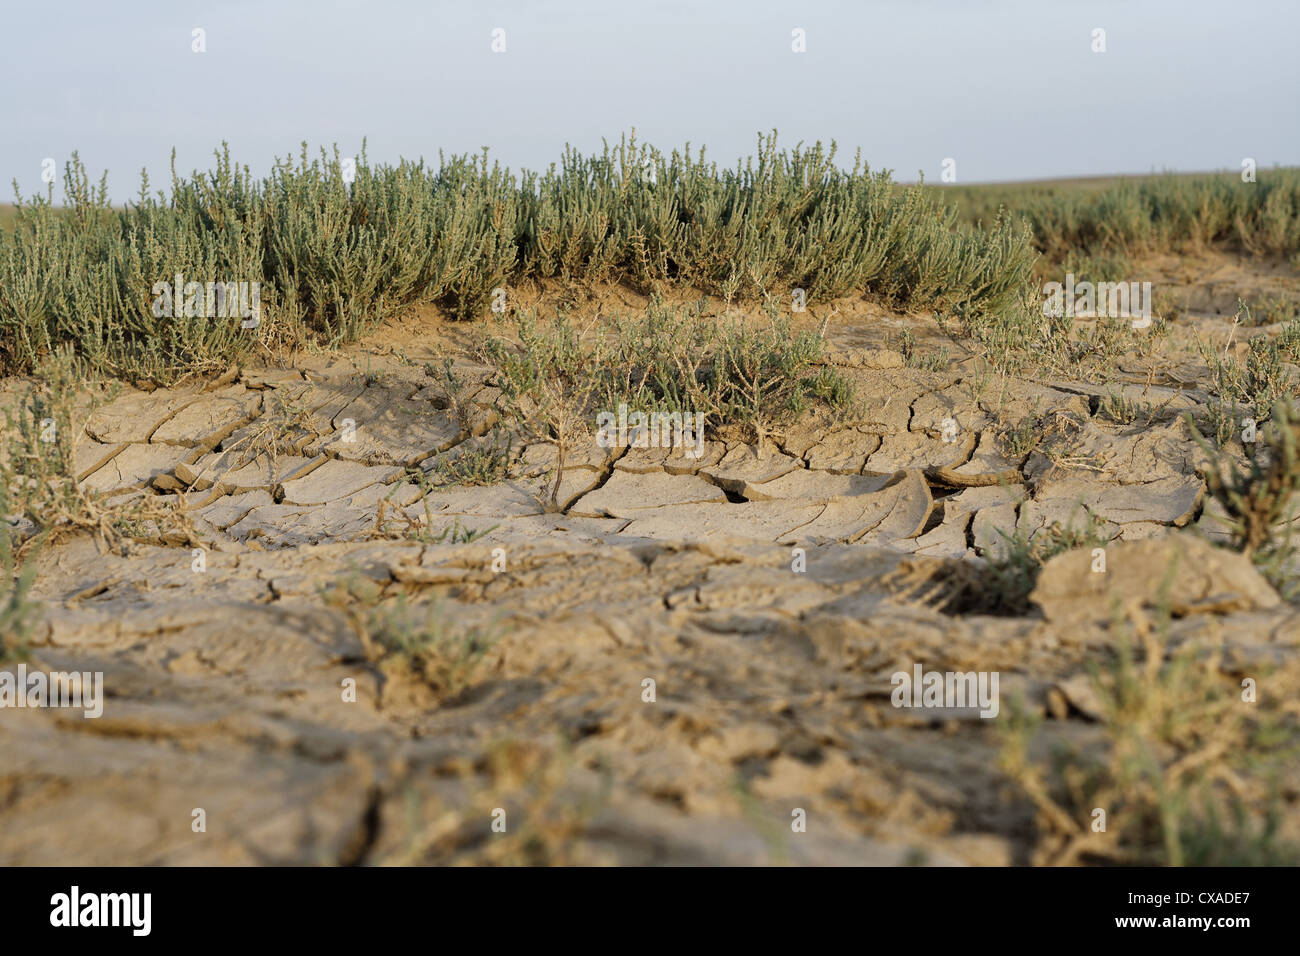 background, catastrophe, clay, climate, cracked, desiccated, detail, disaster, dried, drought, dry, earth, environment, environm Stock Photo